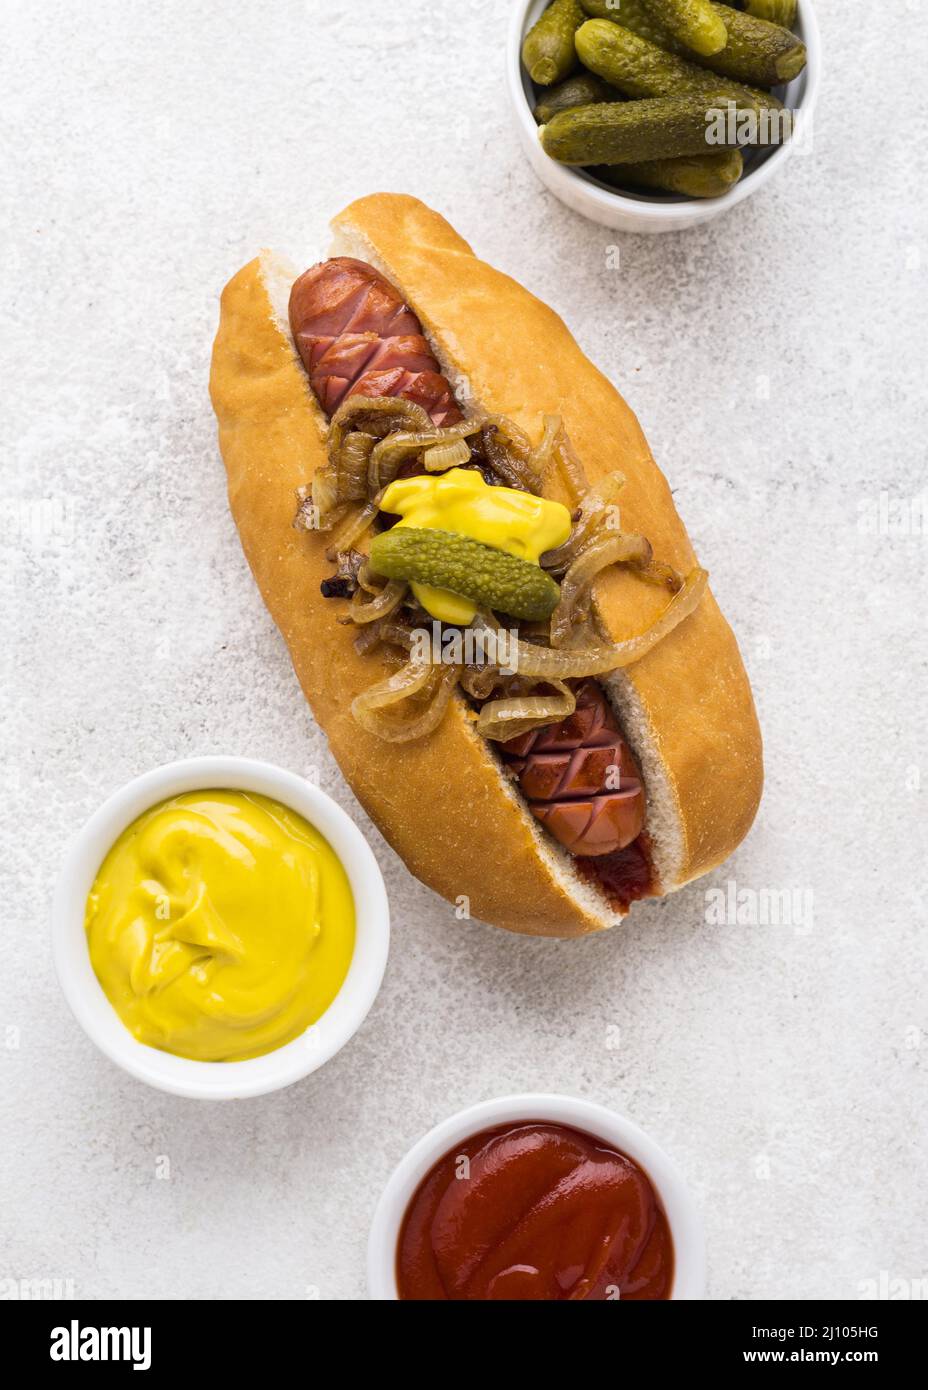 Top view delicious hot dog with onion Stock Photo